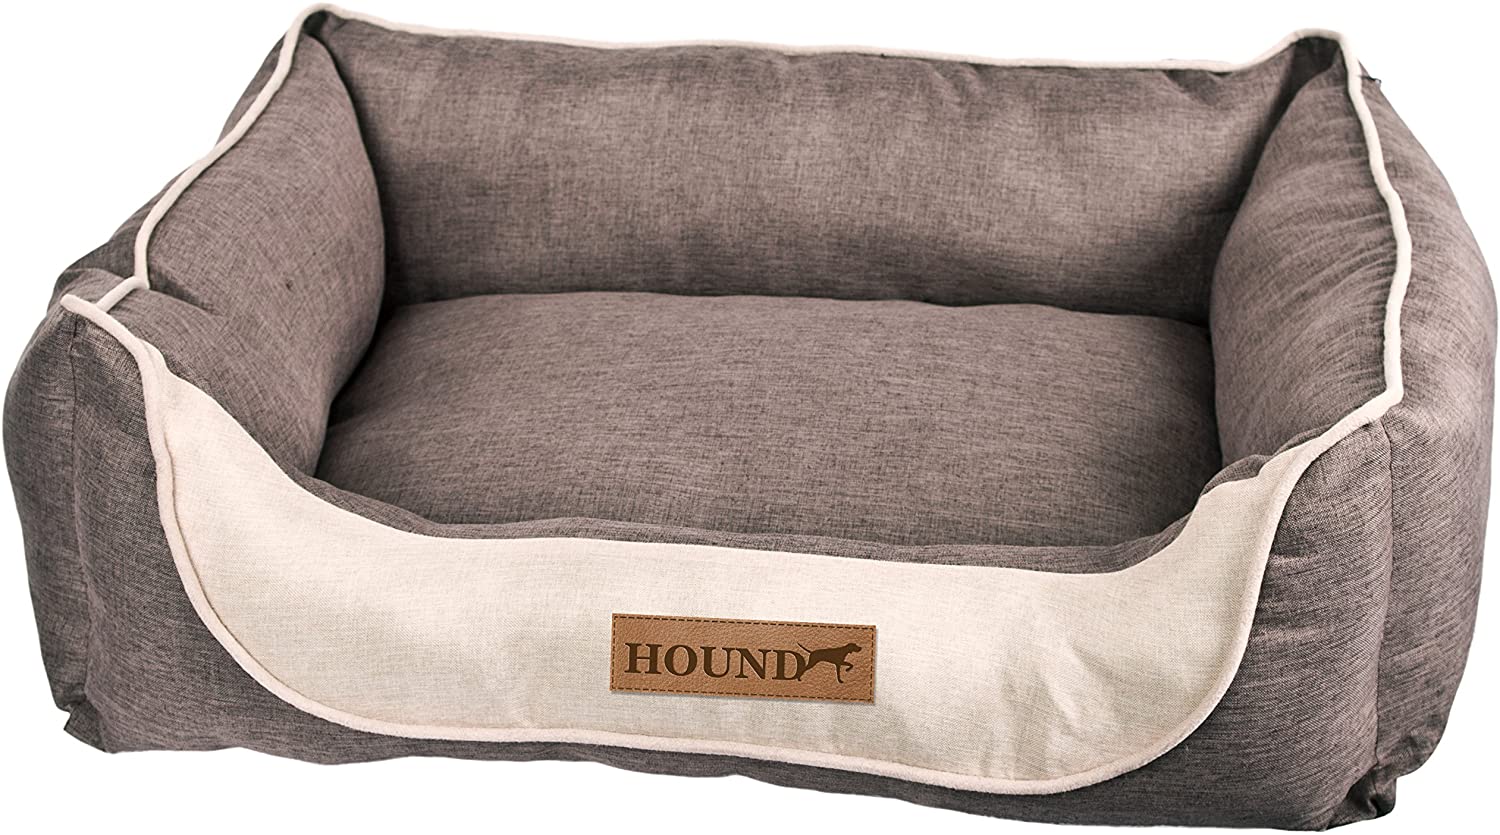 Hound Comfort Bed Review